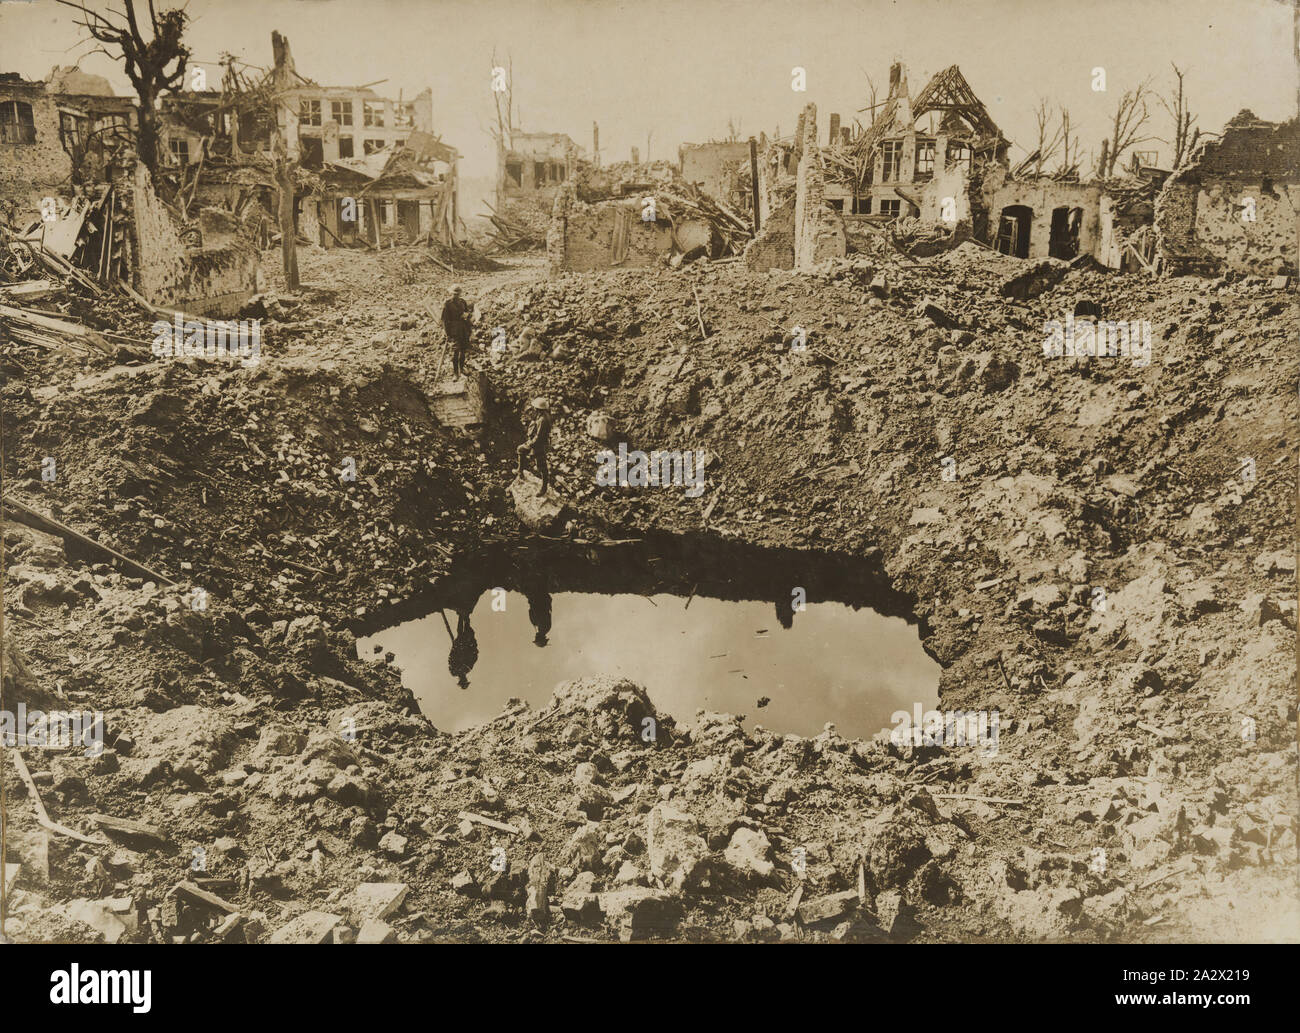 Photograph - 'A Big Crater', Ypres, Belgium, World War I, 25 Sep 1917, Photograph of a bomb crater in the middle of the town in the aftermath of the battle of Ypres, Belgium. The Battle of Menin Road occured 20-25 September 1917. It was part of the so-called 'Third Battle of Ypres' on the Western Front Stock Photo